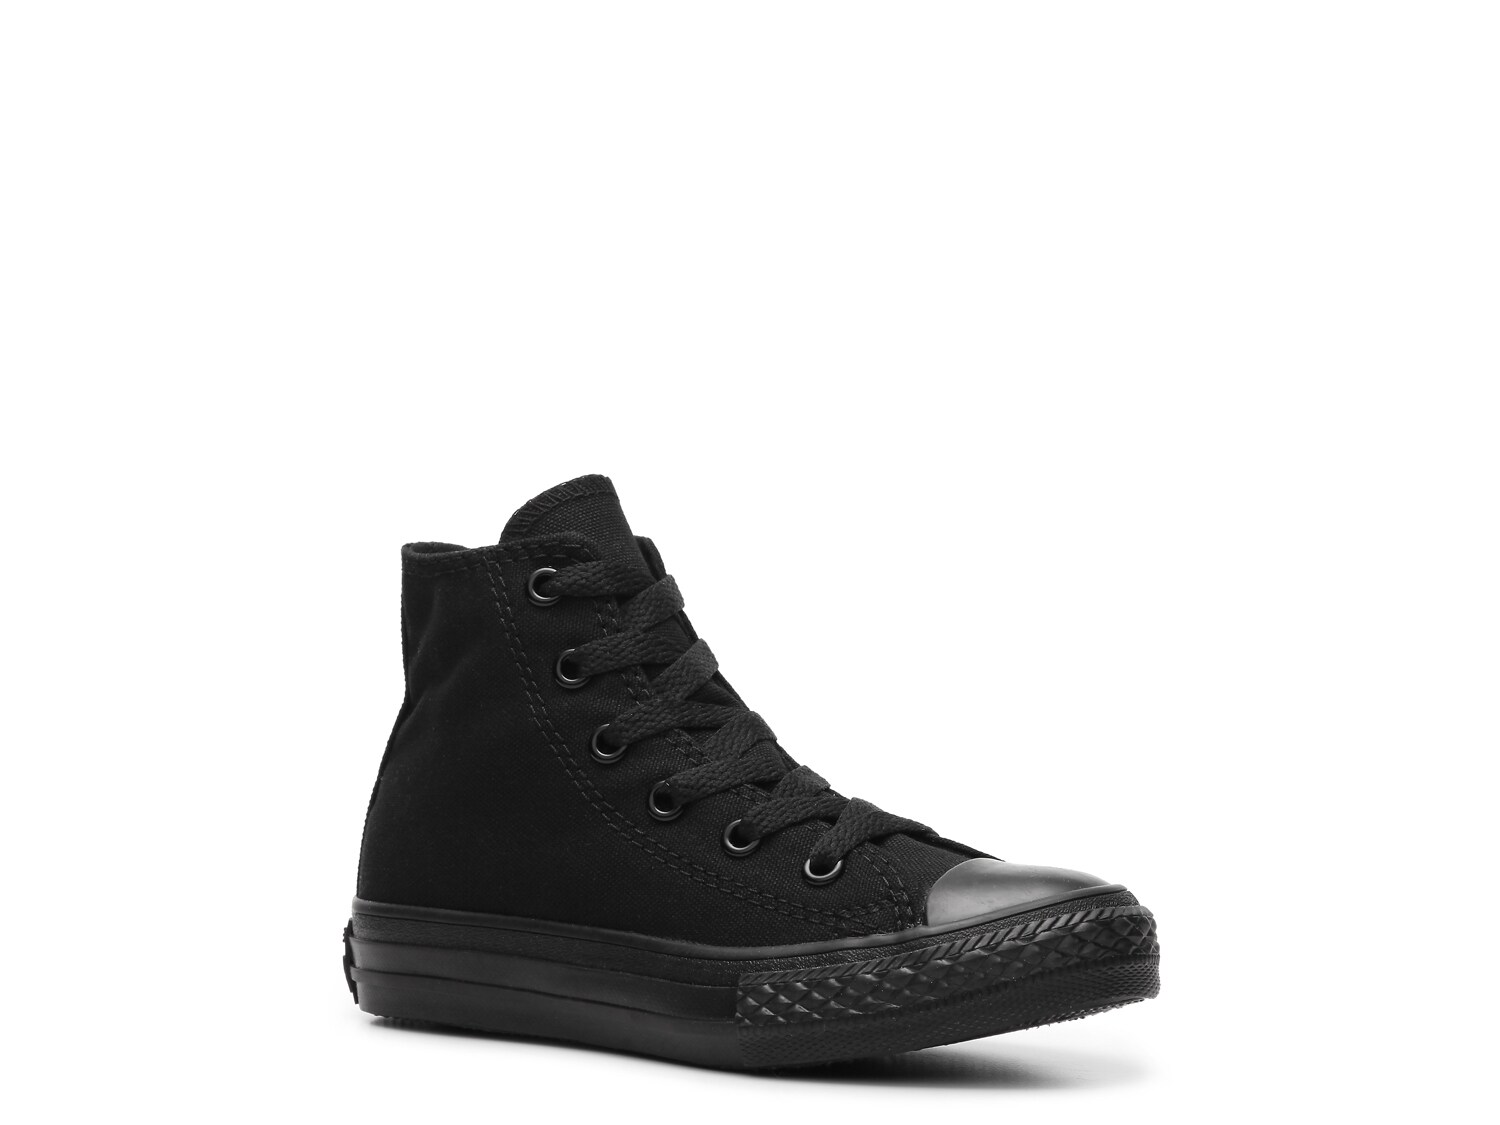 Converse Chuck Taylor All Star High-Top Sneaker - Kids' - Free Shipping |  DSW